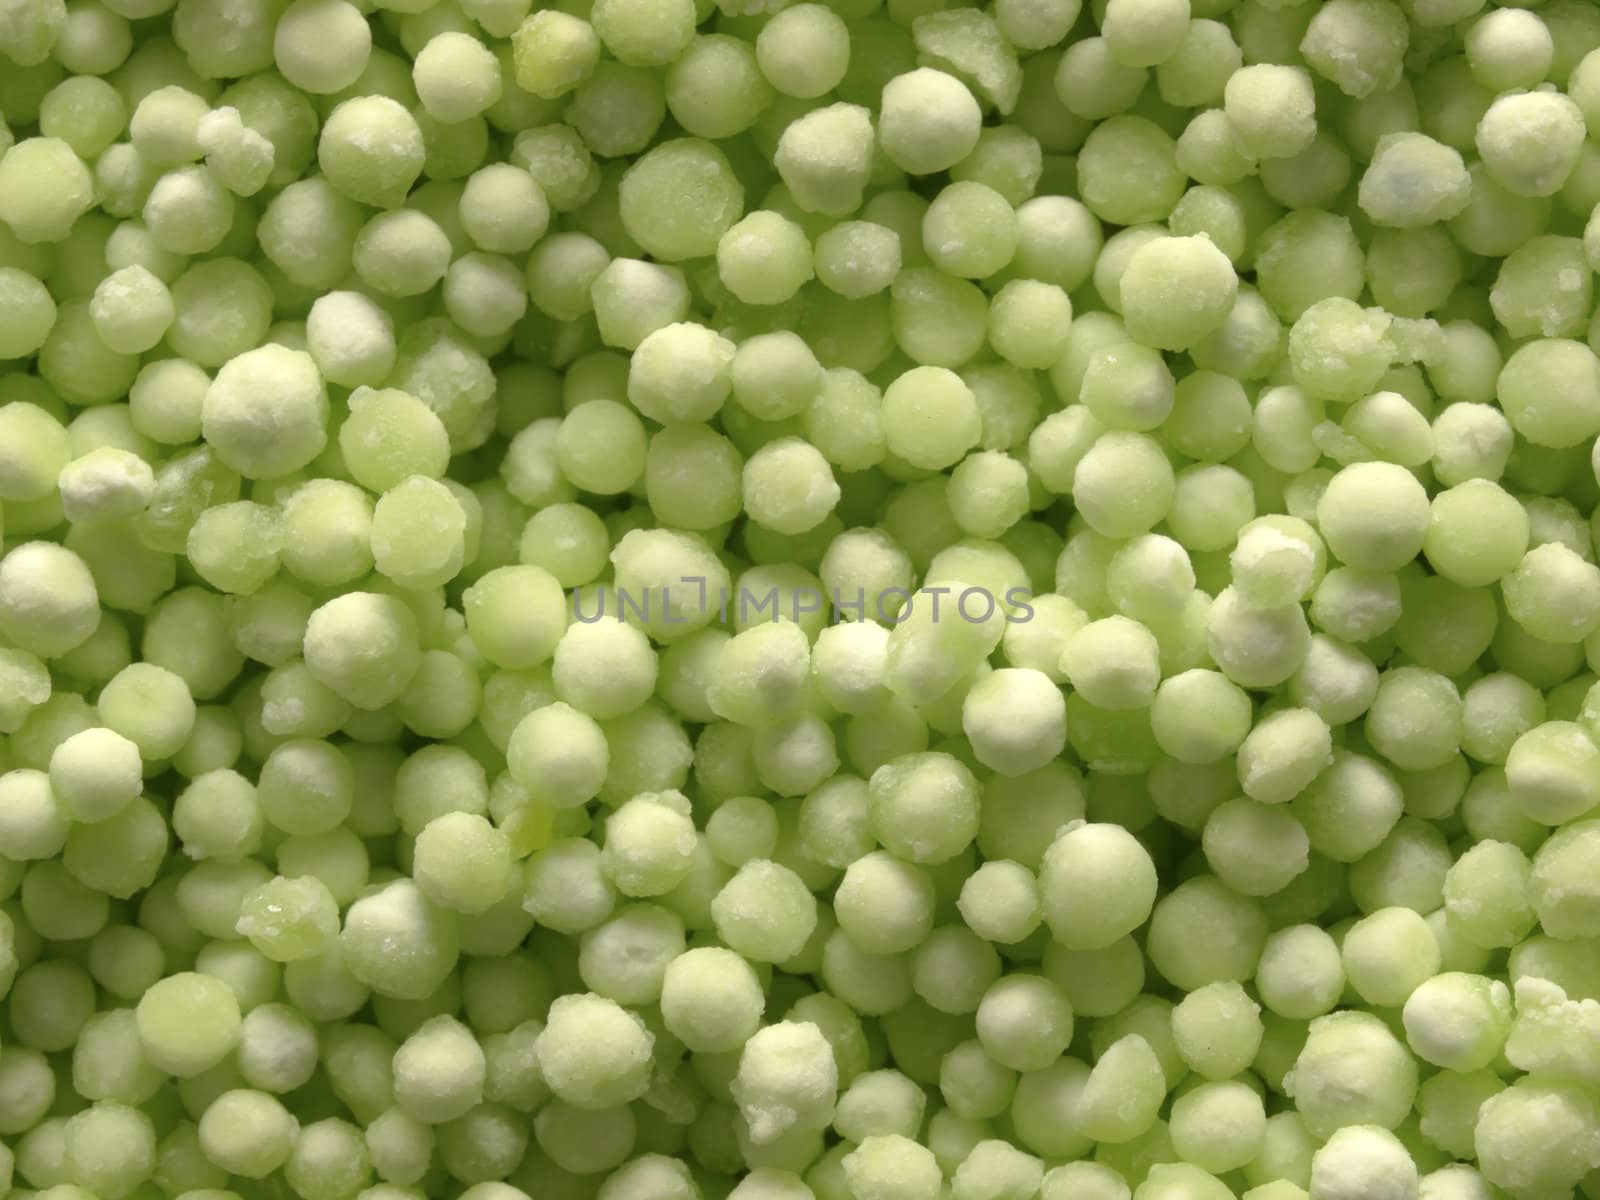 close up of green sago pearls food background